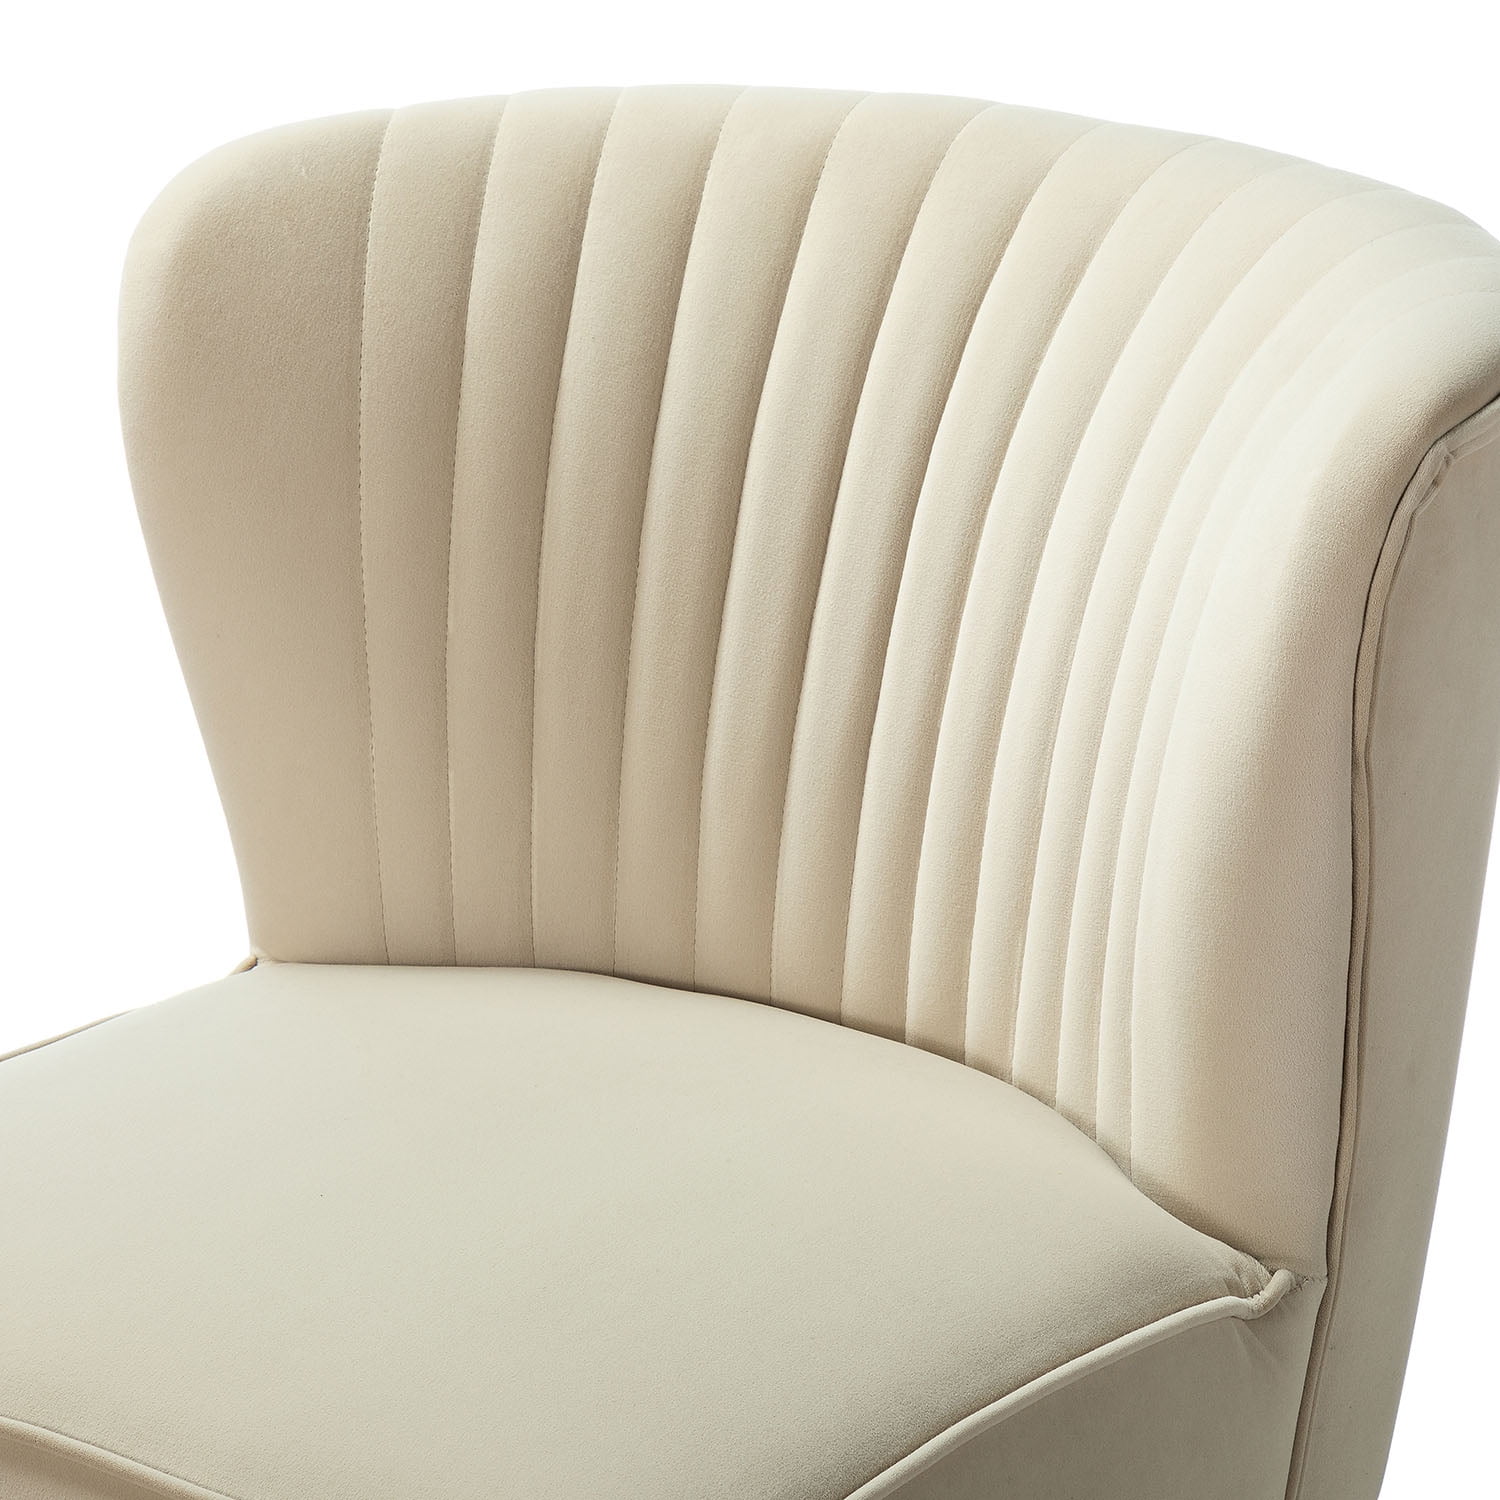 Gold Chairs Bedroom Tan Set Adult Leg Chair Side Accent 2,Upholstered Home Velvet Metal of